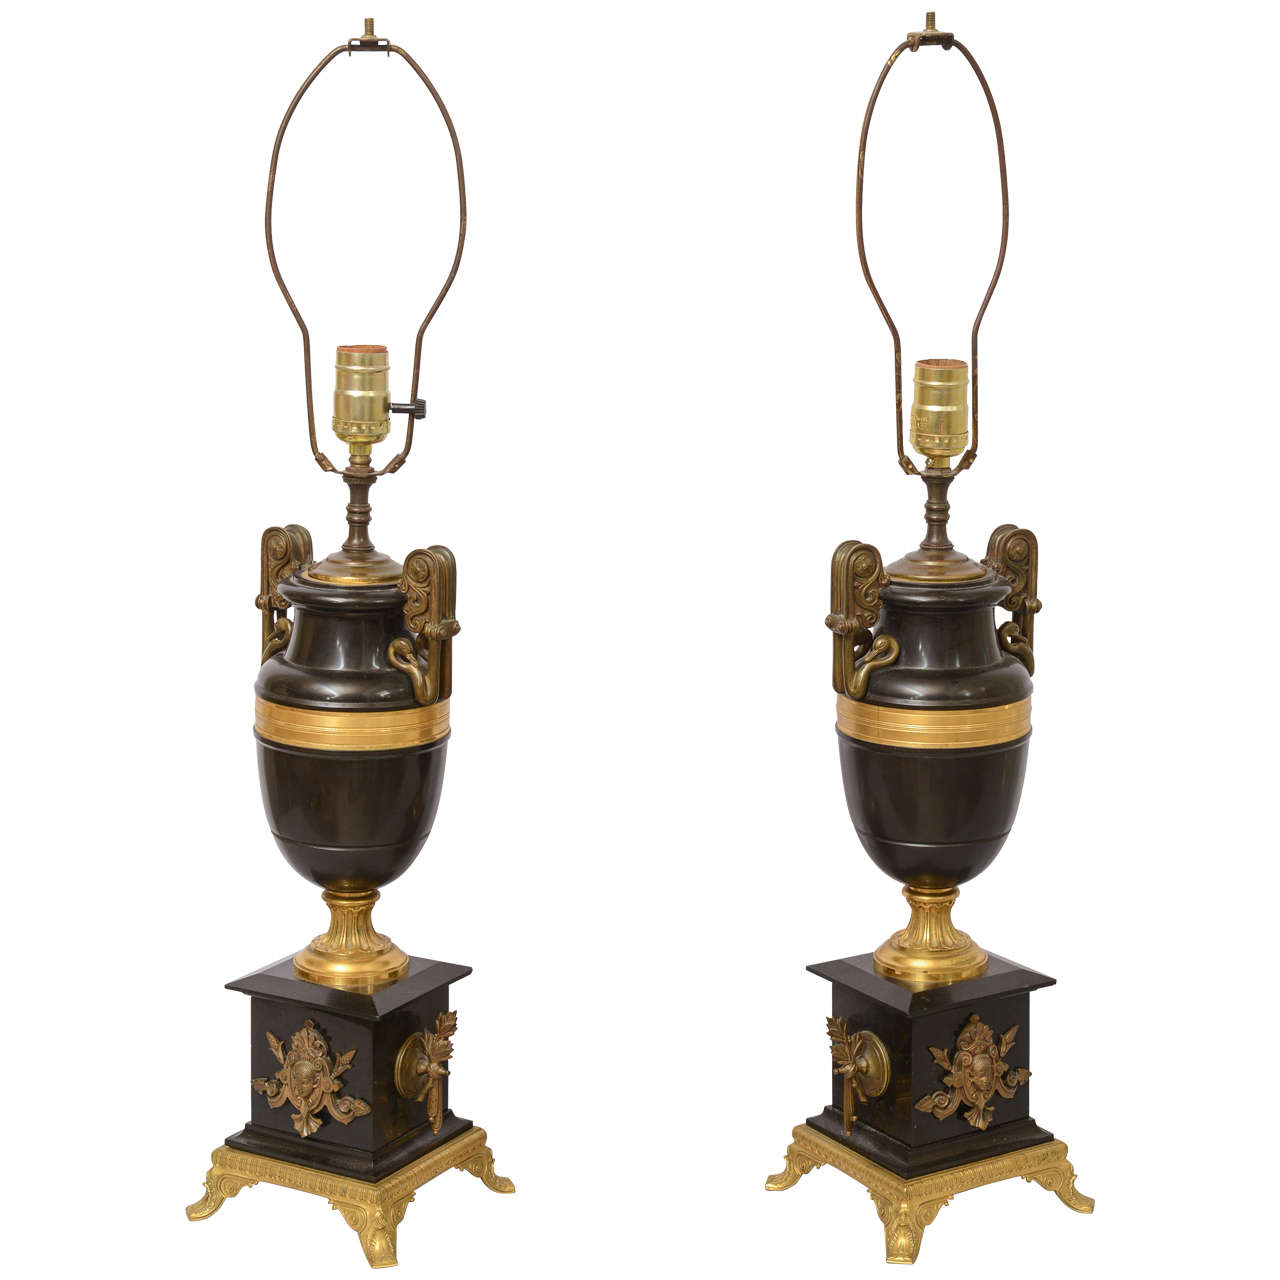 Pair of 19th Century French Neoclassical Urn Lamps